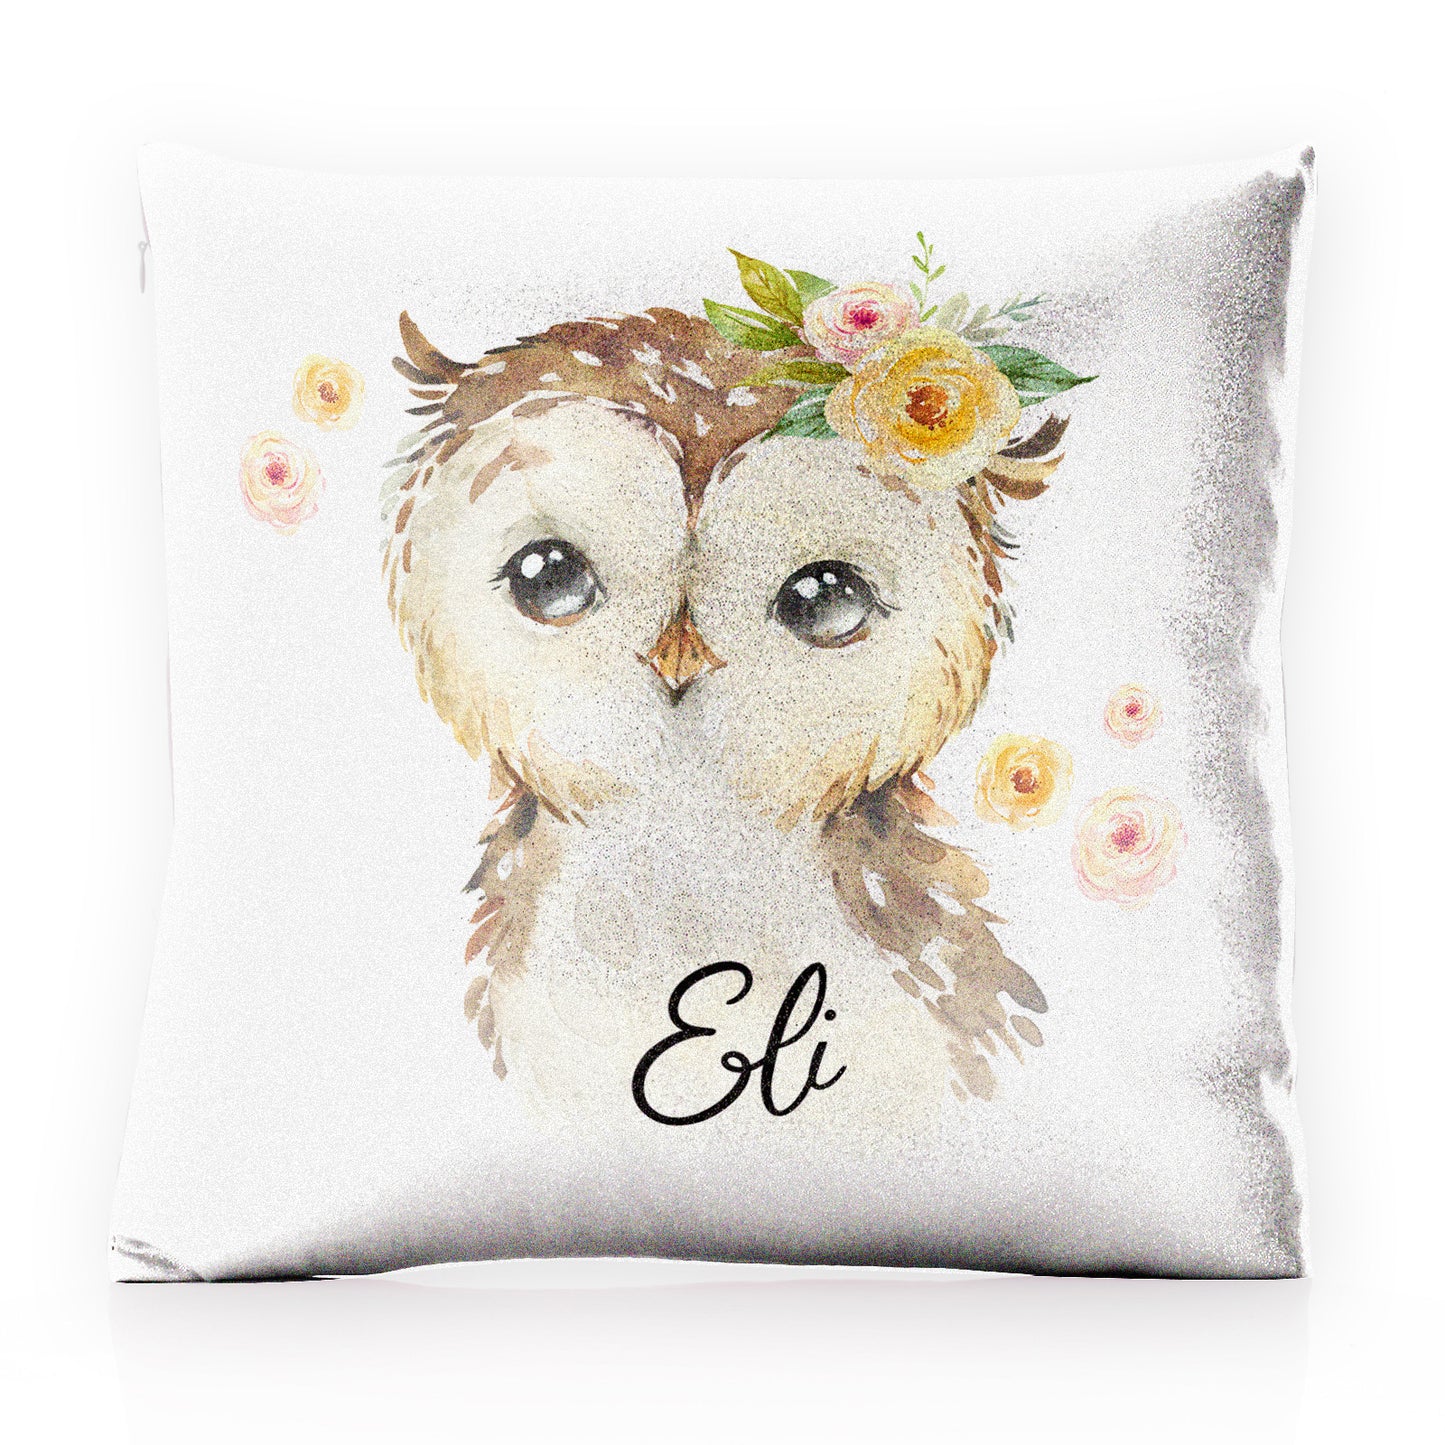 Personalised Glitter Cushion with Brown Owl Yellow Flowers and Cute Text